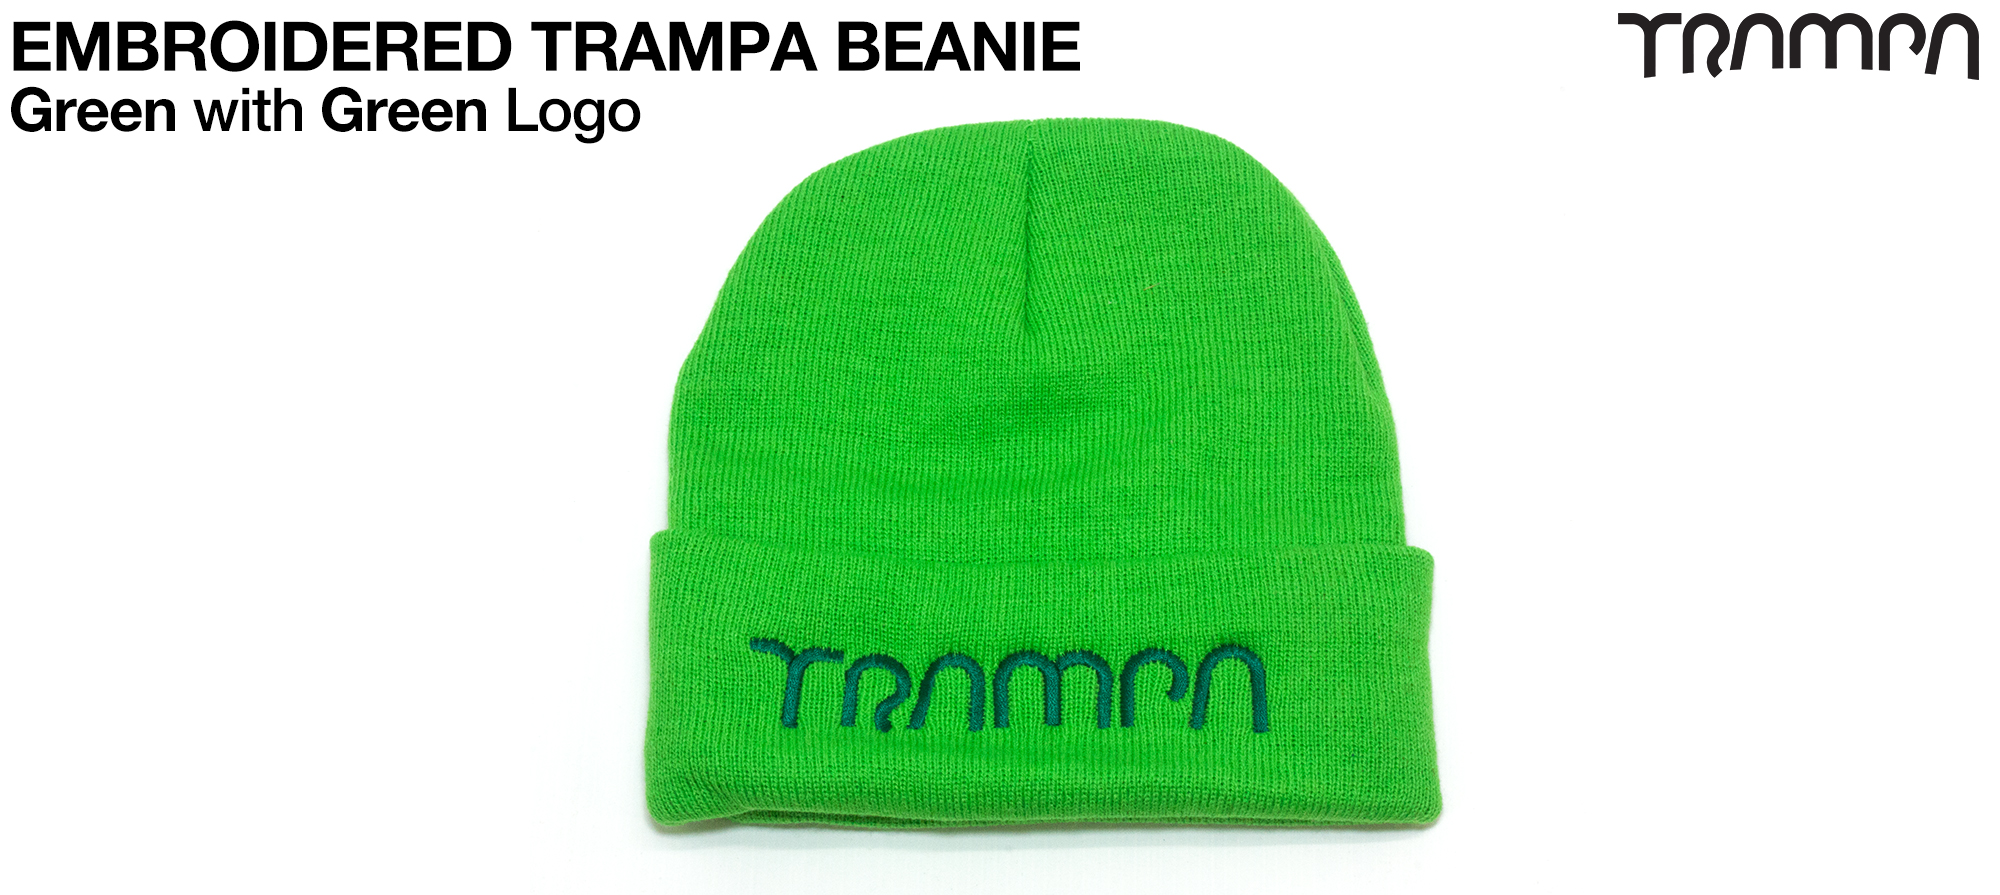 Lime GREEN Woolly hat with Dark GREEN TRAMPA logo